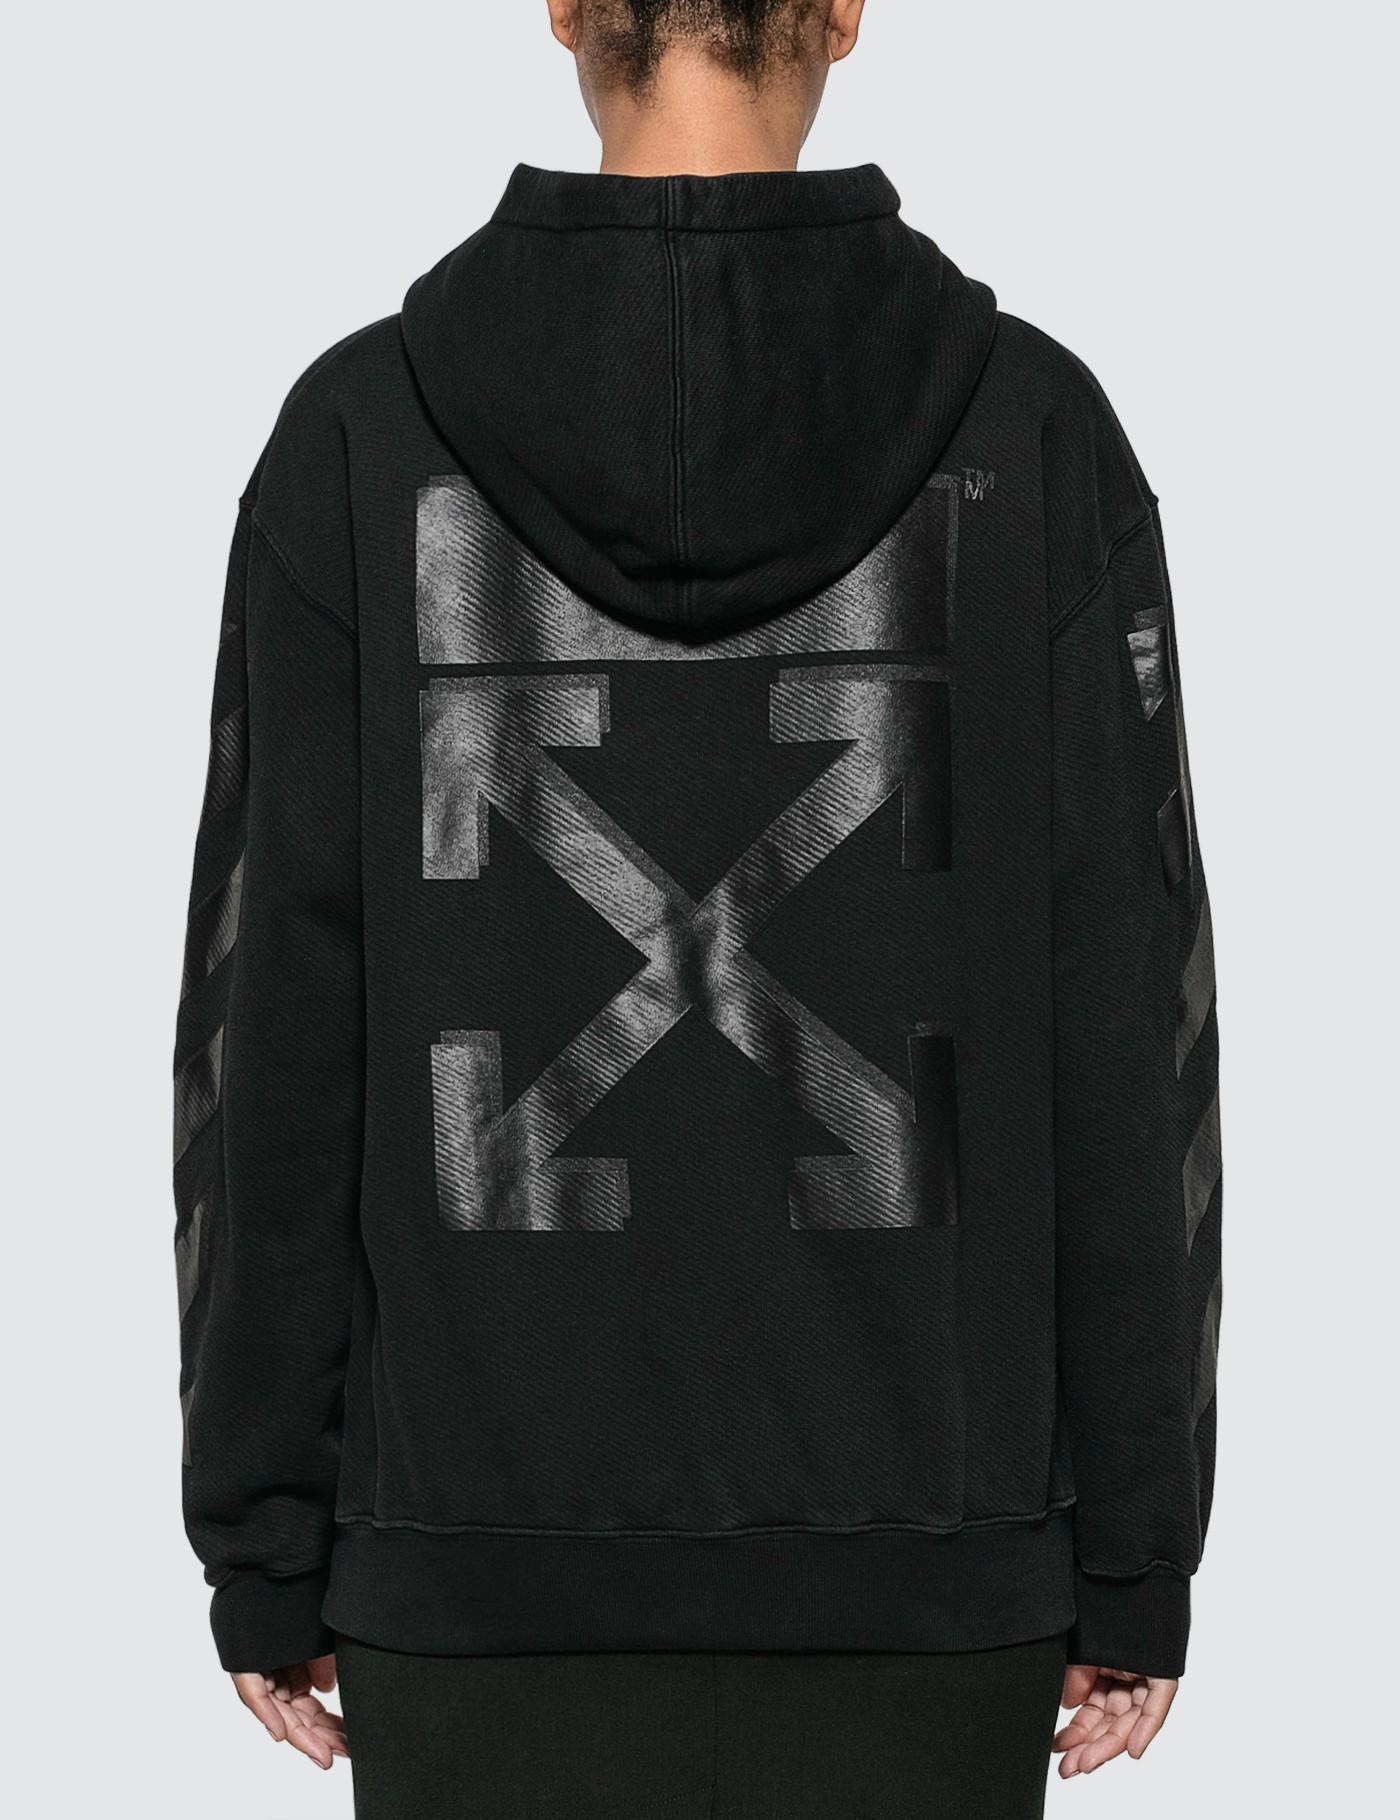 Off-White c/o Virgil Abloh Cotton Diag Hoodie in Black - Lyst